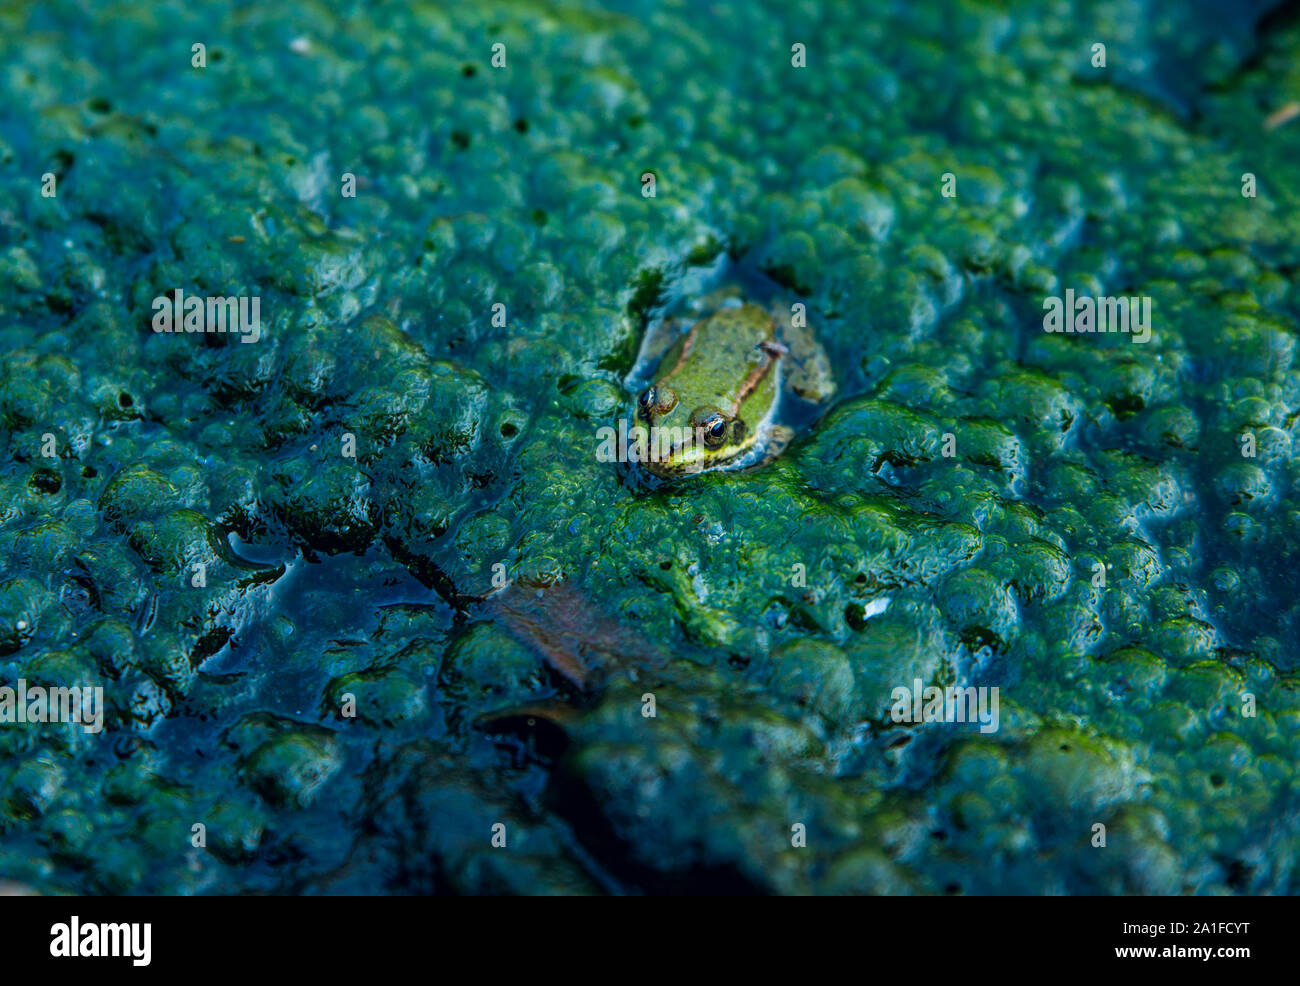 Frog in the dirty pond water of a lakeFrog in the dirty pond water of a lake Stock Photo